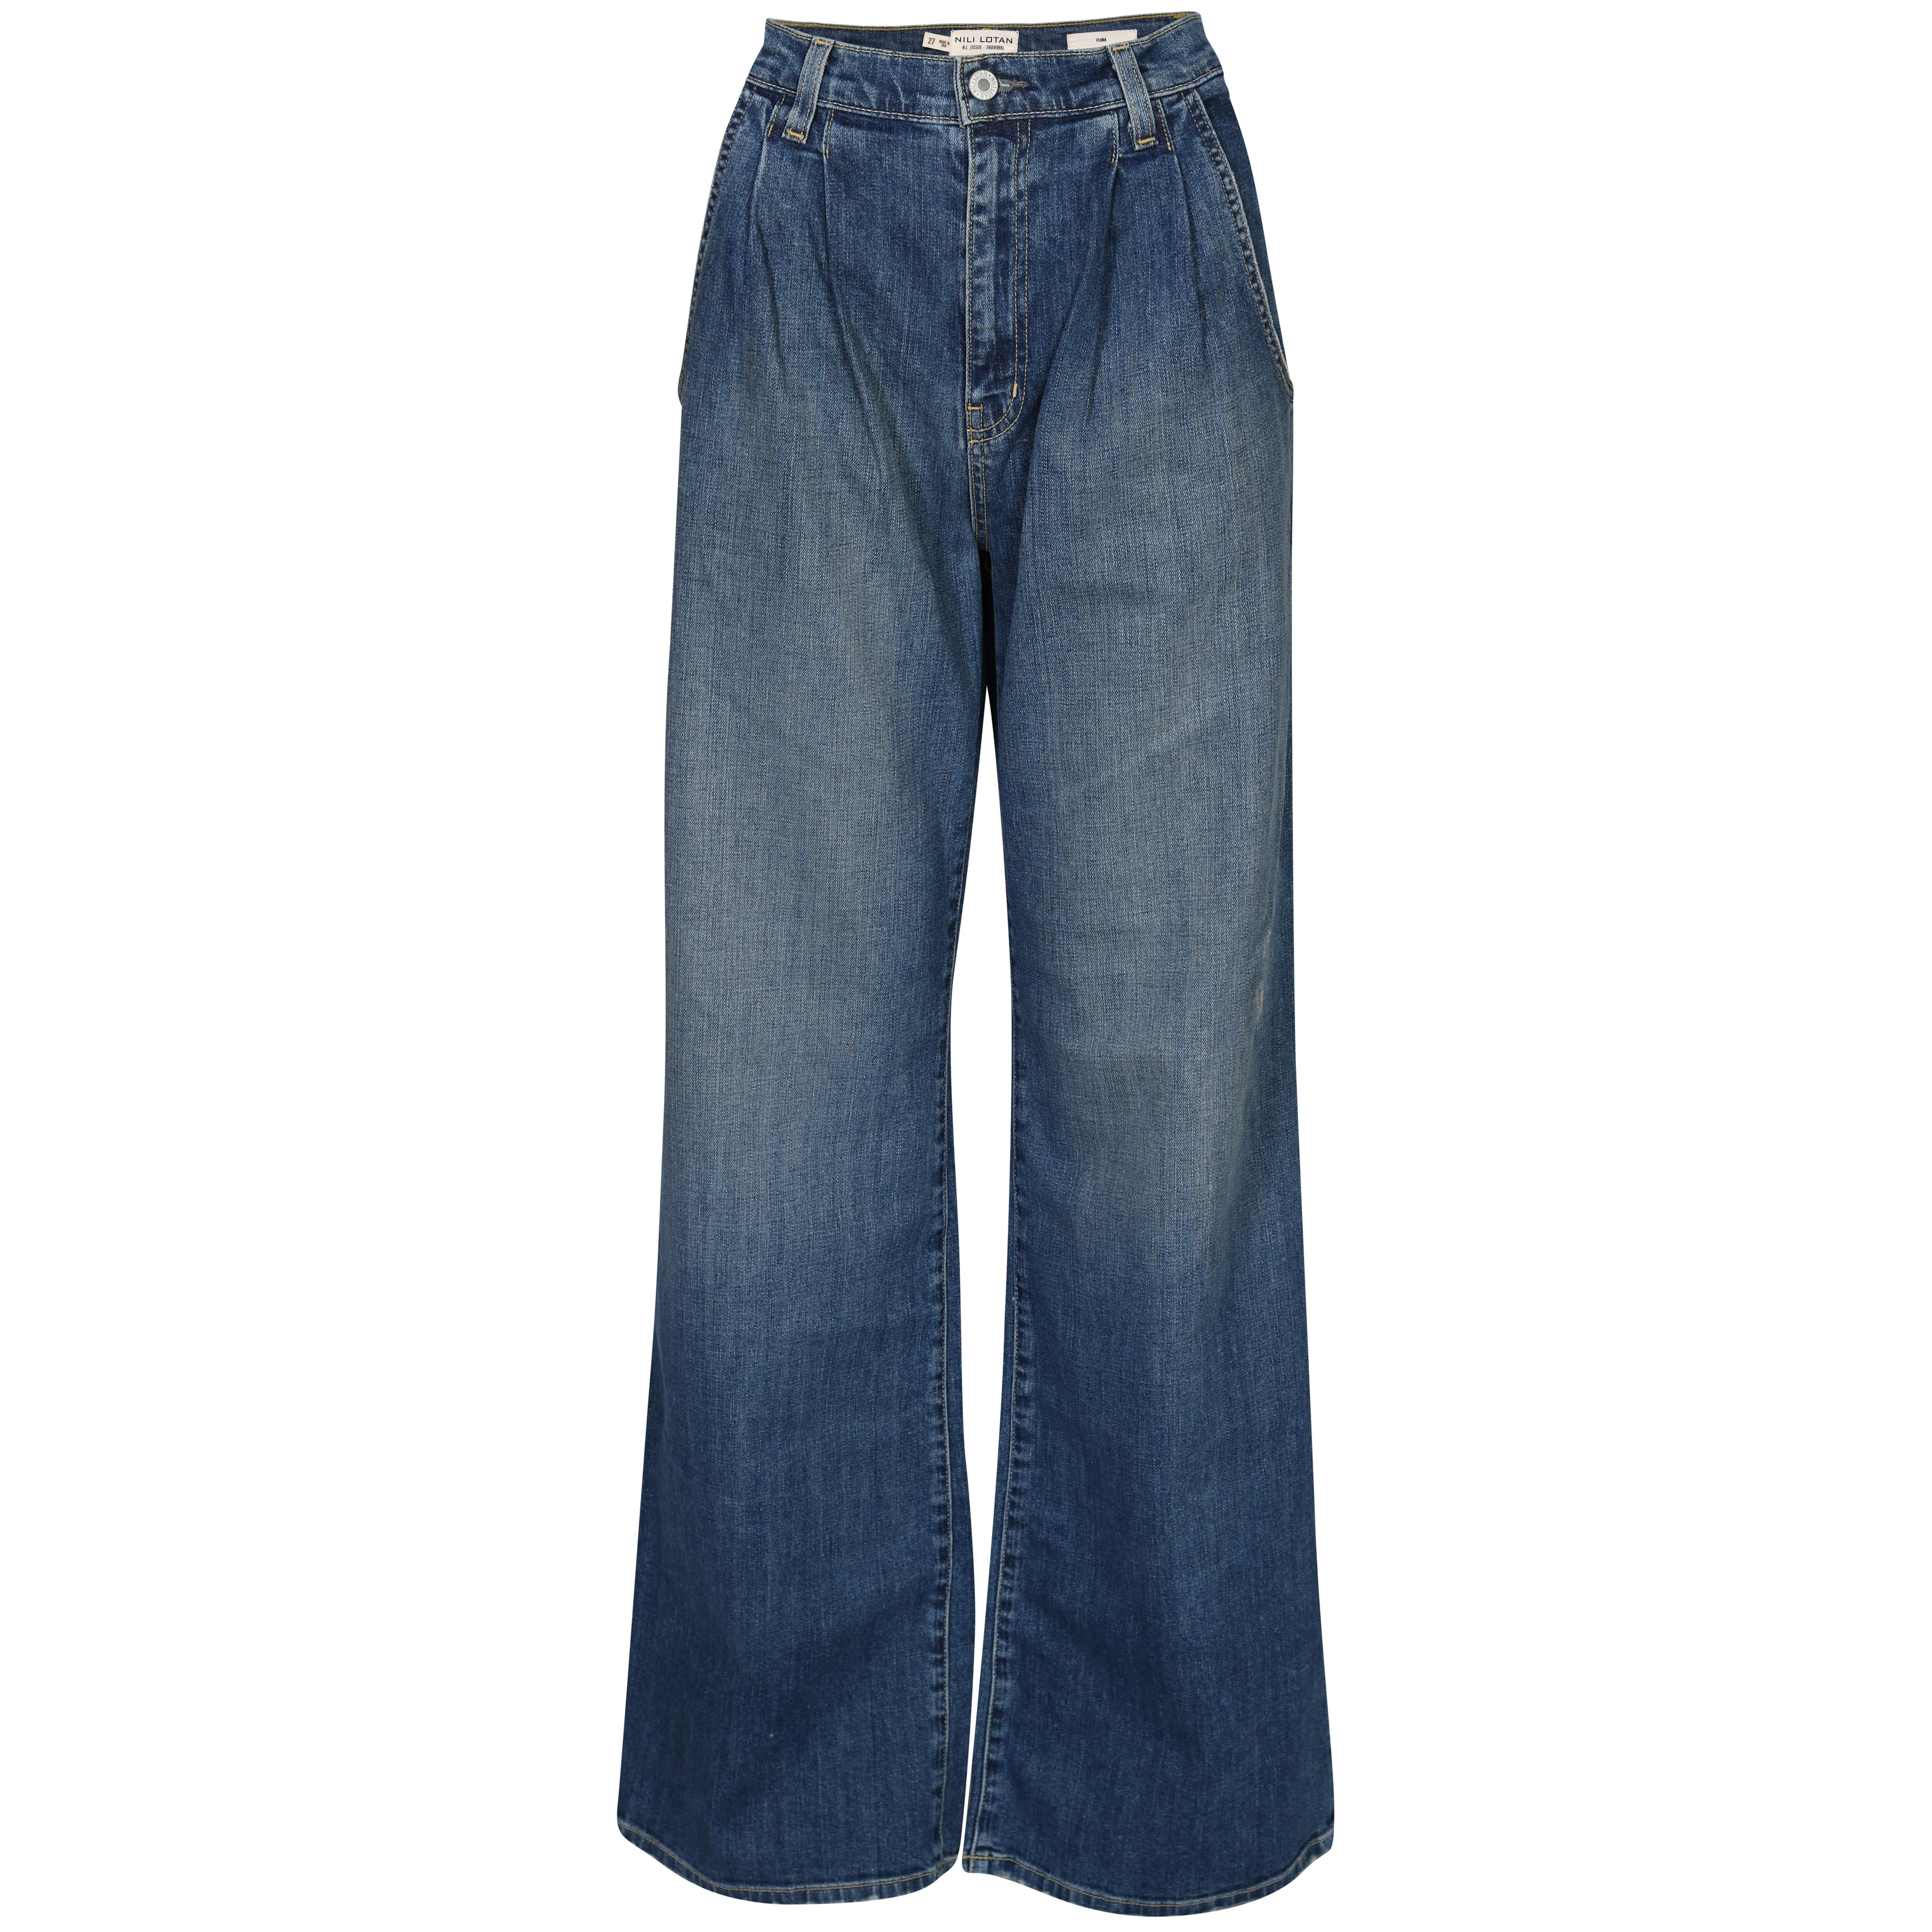 Nili Lotan Flora Jeans in Classic Washed